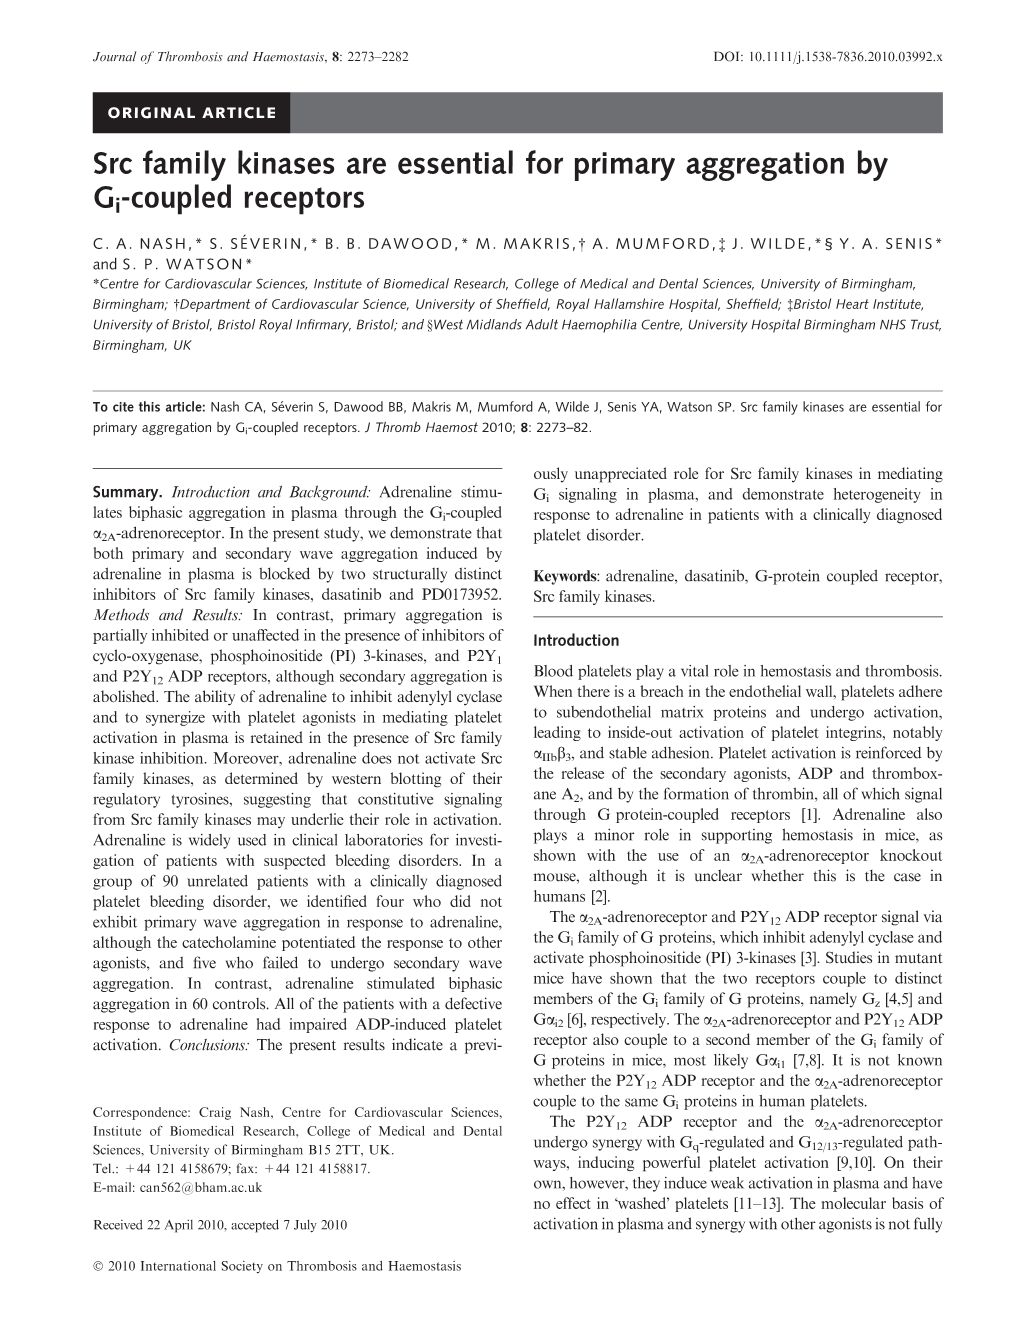 Src Family Kinases Are Essential for Primary Aggregation by Gi-Coupled Receptors